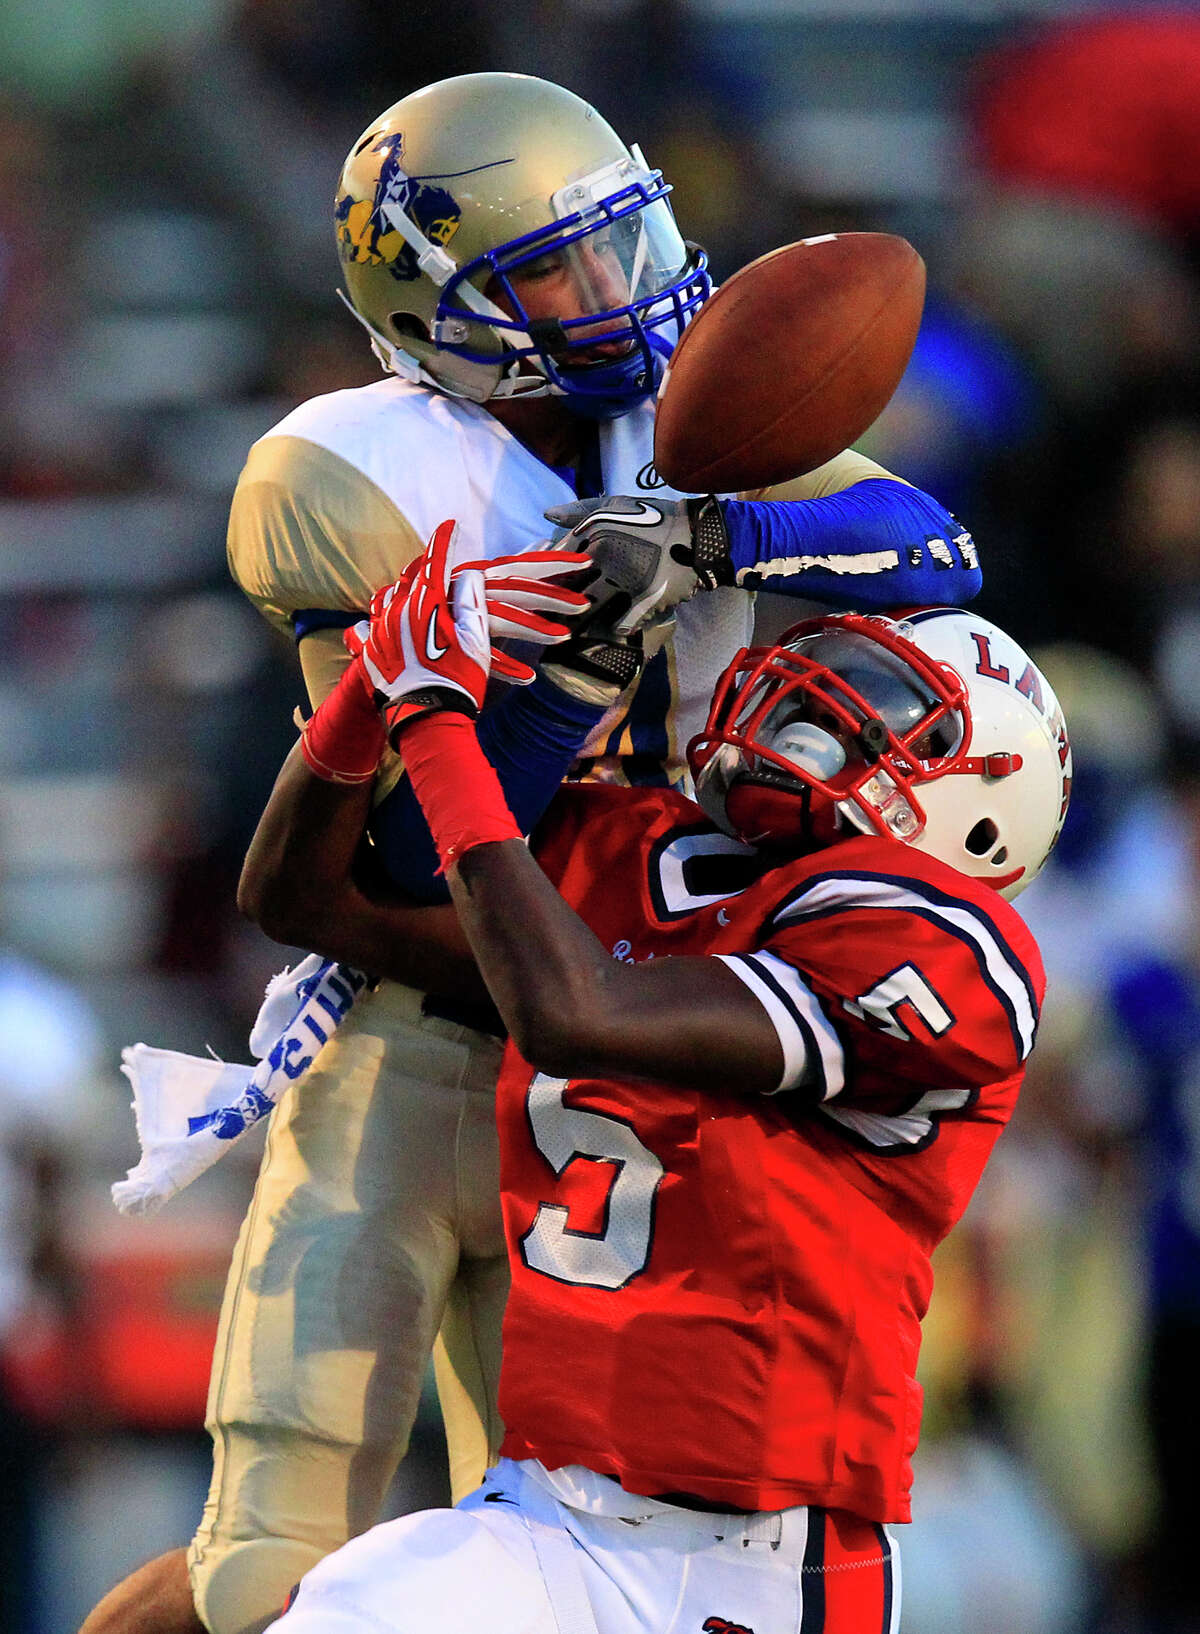 Despite Shahab Khorshidpanah's best efforts, Lamar's Holton Hill, right, breaks up the first-half pass to the Elkins receiver. The Redskins intercepted three passes en route to a 38-6 win.